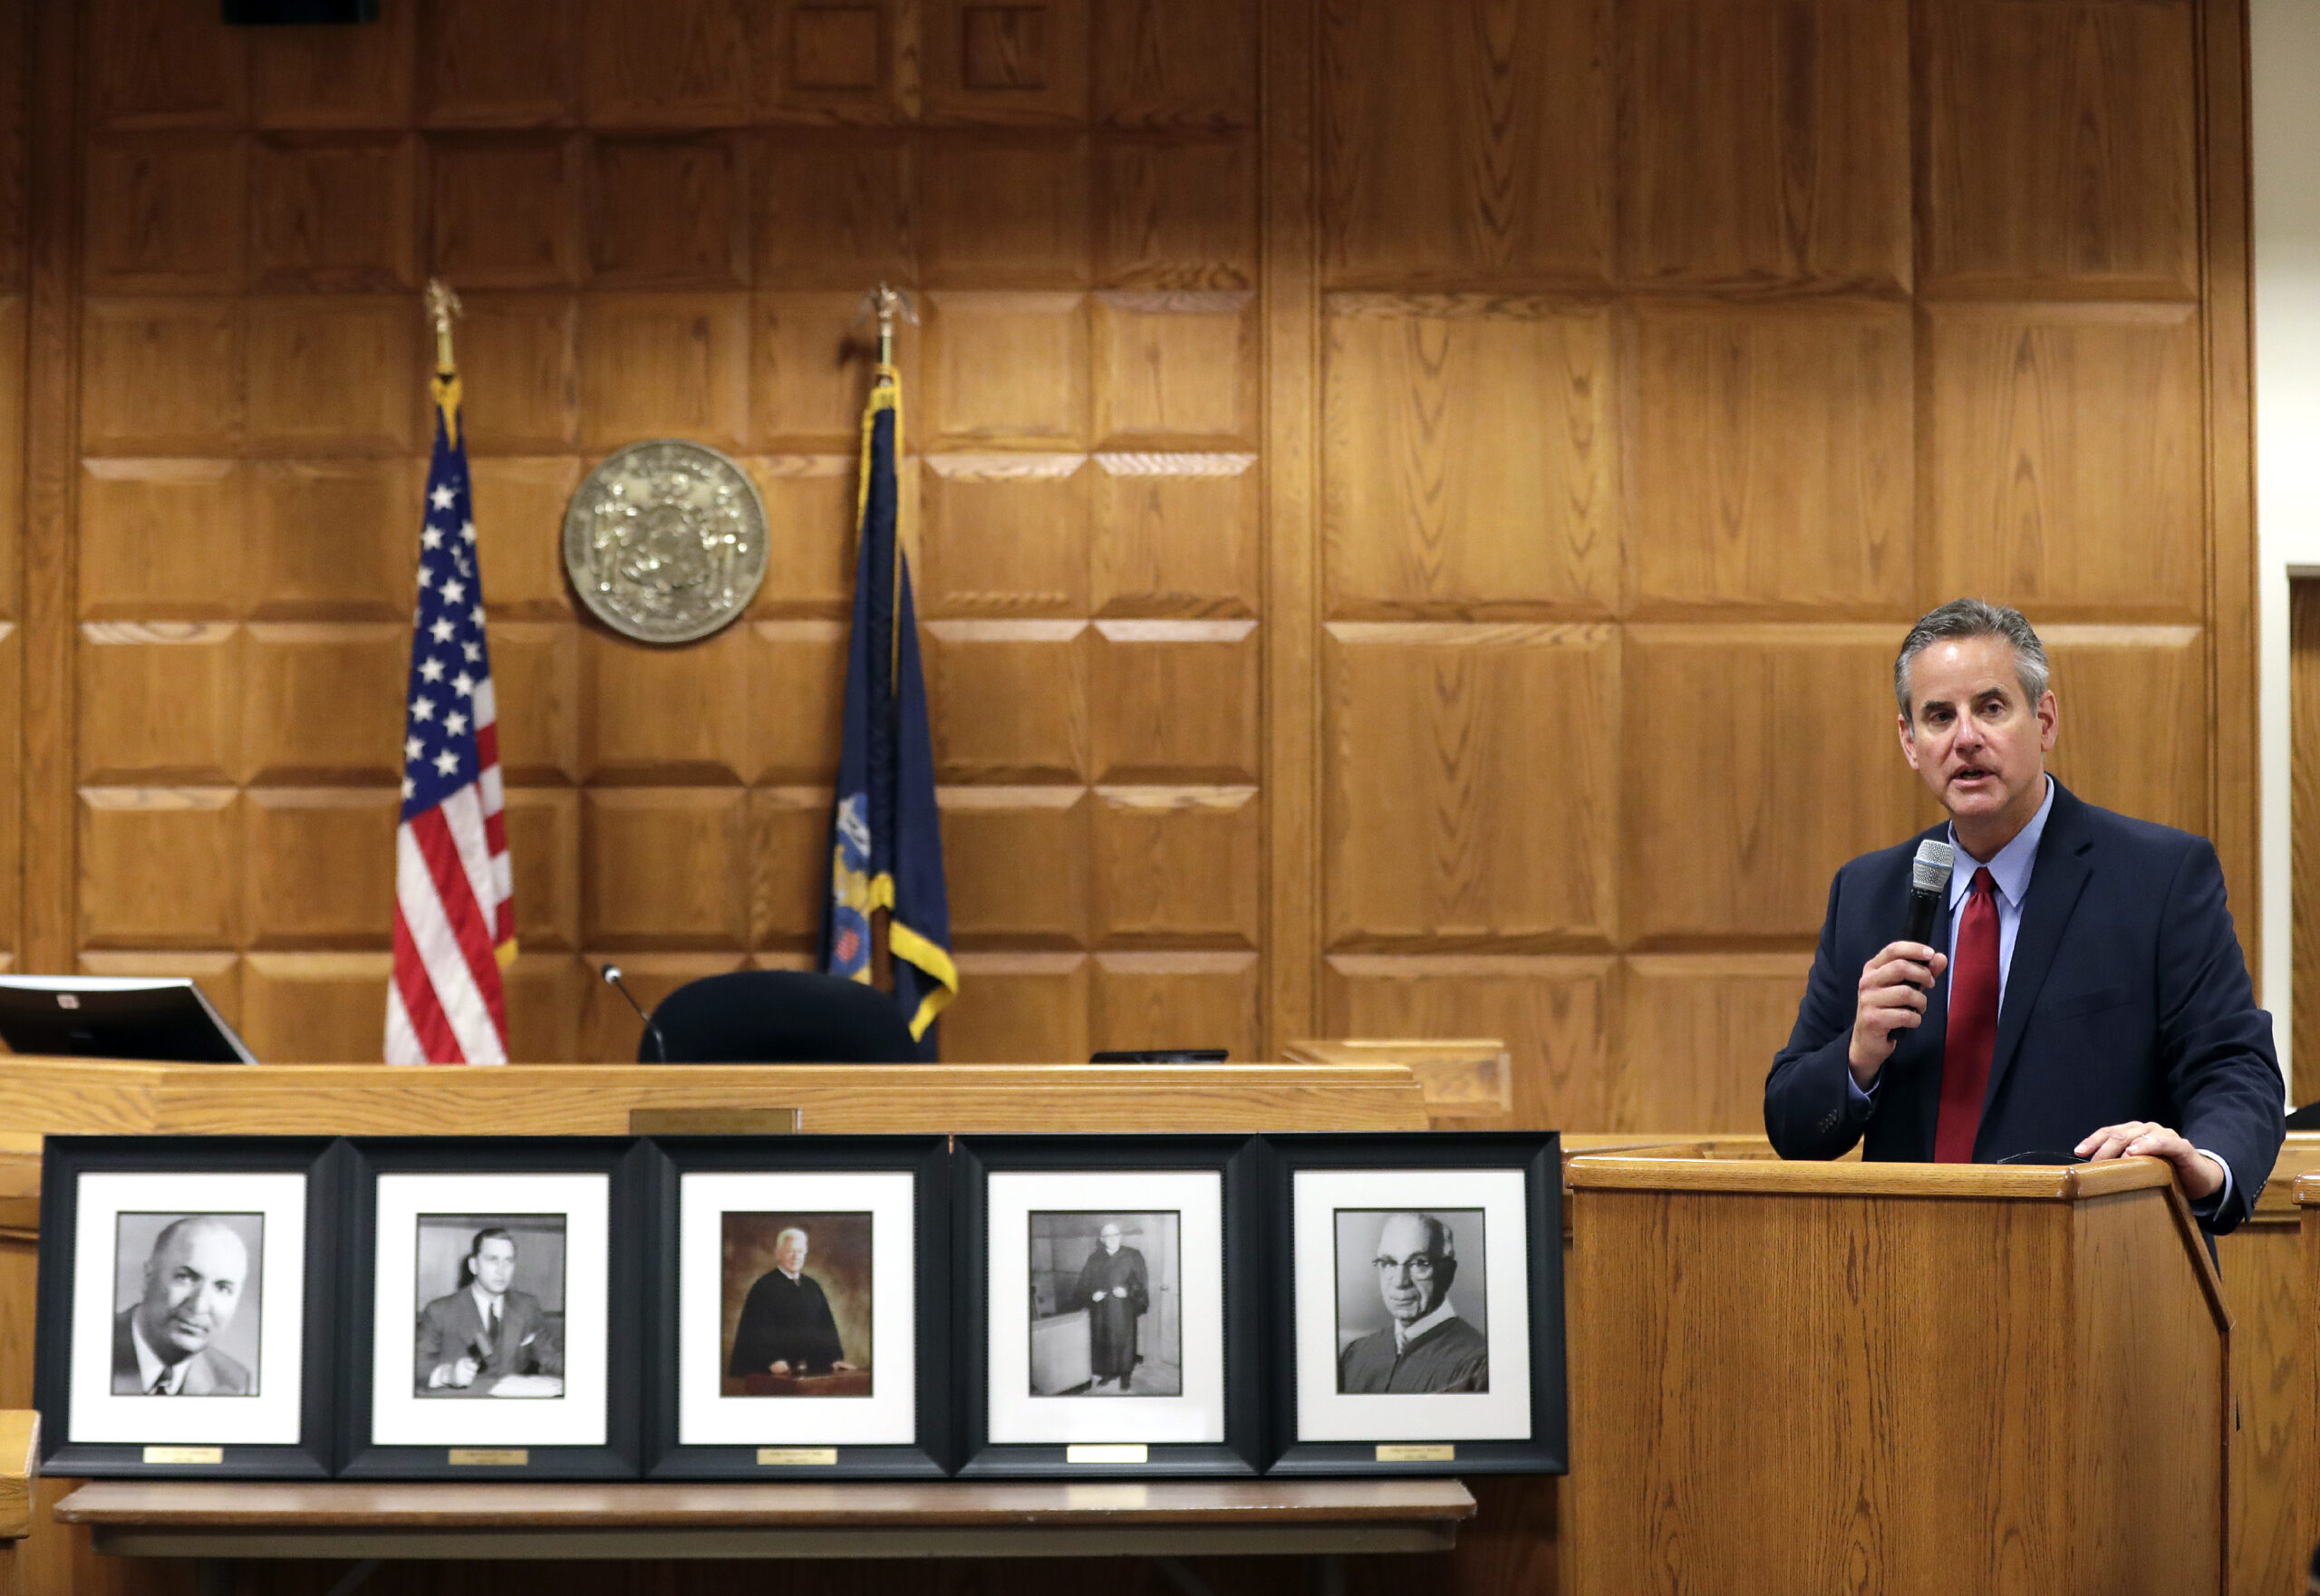 Biskupic speaks during the Outagamie County judicial portrait ceremony